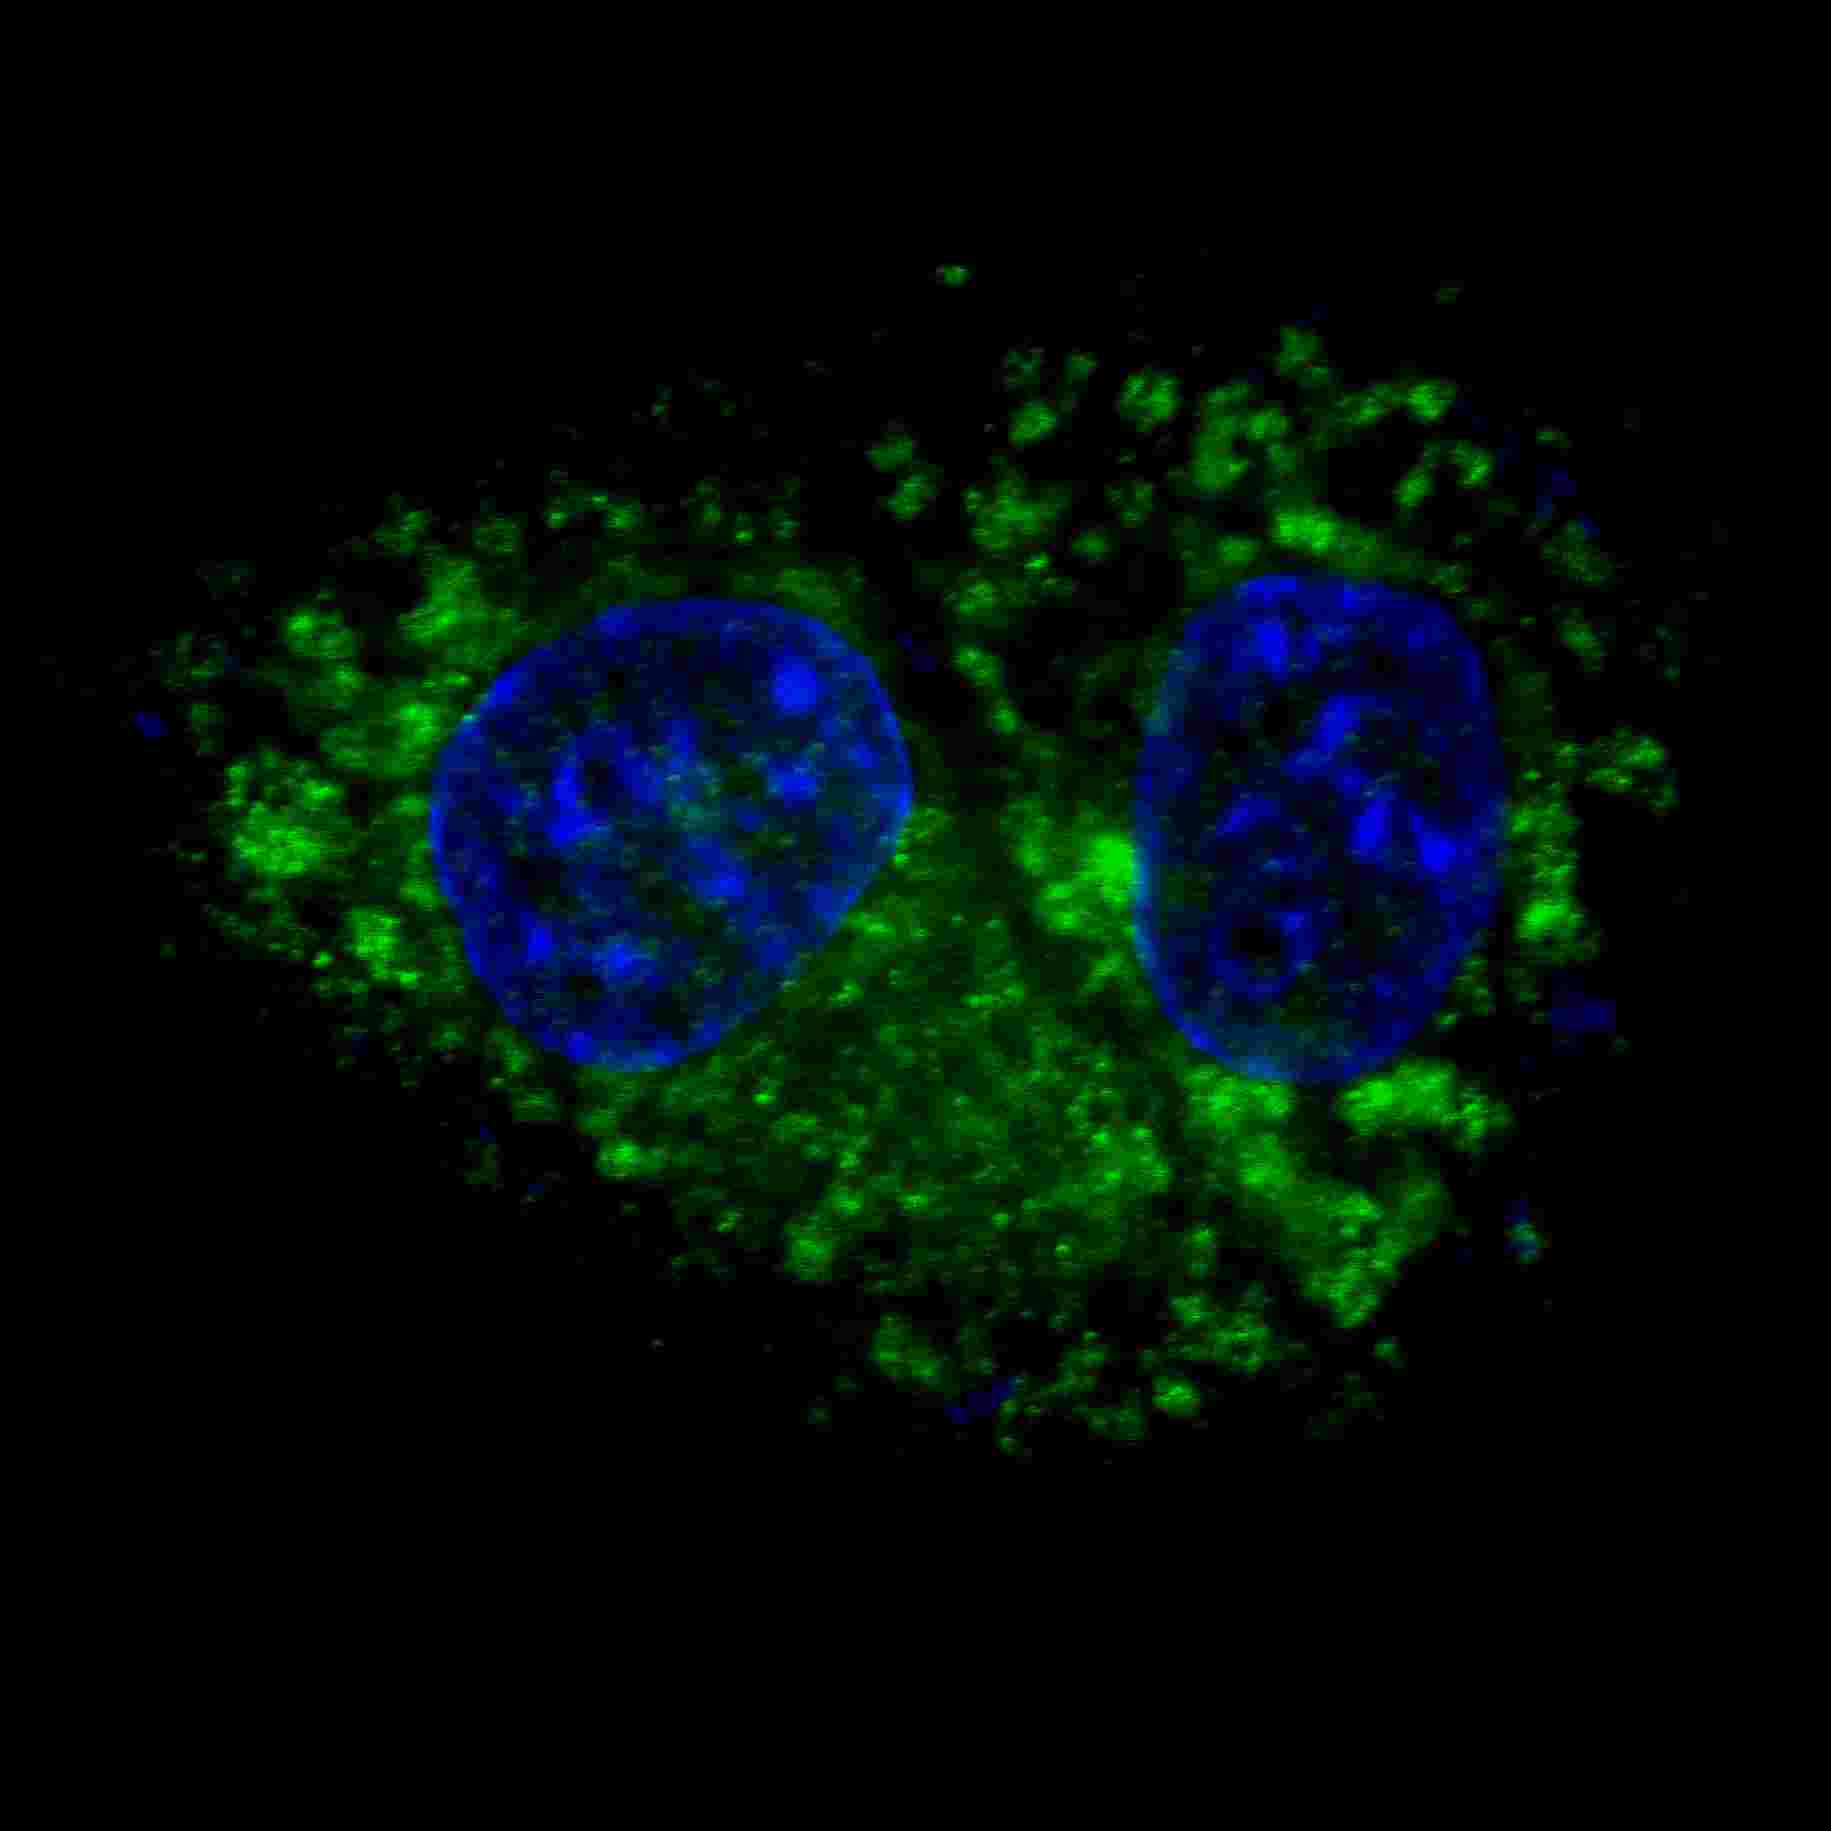 Fluorescent confocal image of HepG2 cells stained with ALDH1A1 antibody. HepG2 cells were fixed with 4% PFA (20 min), permeabilized with Triton X-100 (0.2%, 30 min). Cells were then incubated with AP1465d ALDH1A1 primary antibody (1:100, 2 h at room temperature). For secondary antibody, Alexa Fluor� 488 conjugated donkey anti-rabbit antibody (green) was used (1:1000, 1h). Nuclei were counterstained with Hoechst 33342 (blue) (10 ?g/ml, 5 min). ALDH1A1 immunoreactivity is localized to the cytoplasm of HepG2 cells.